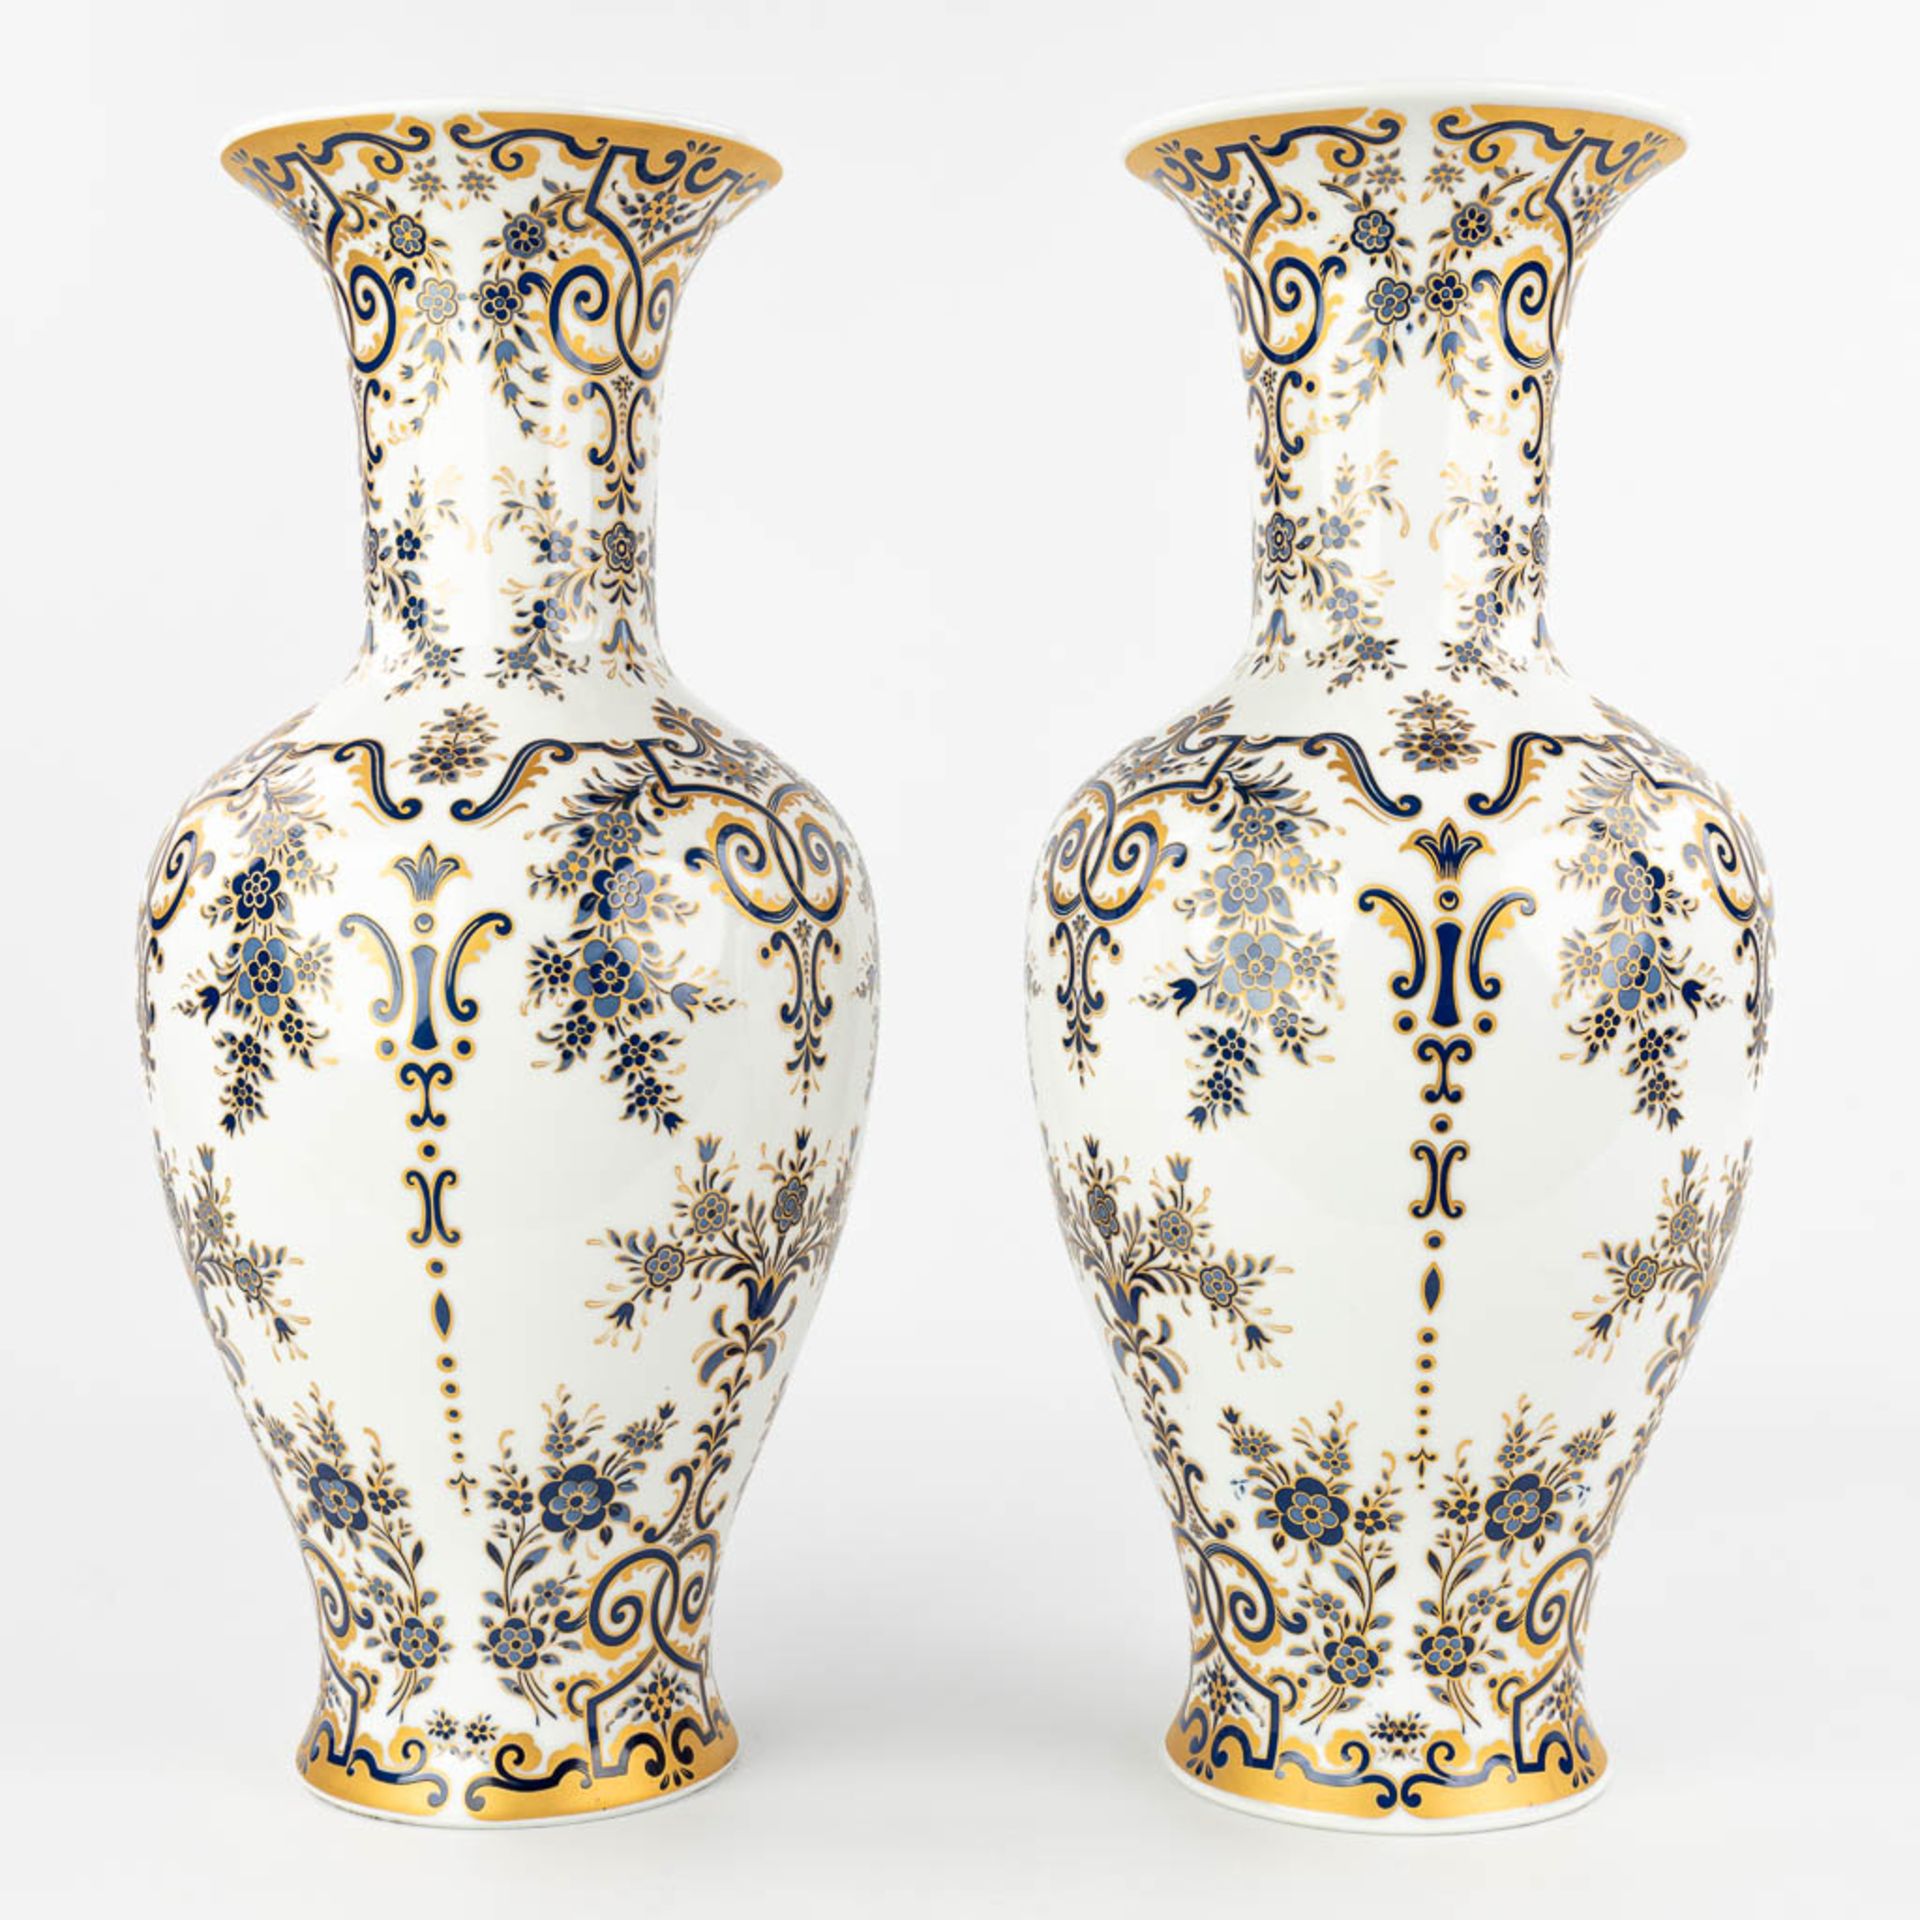 A pair of white porcelain vases with blue and gold decor marked Krautheim Bavaria and made in German - Image 8 of 13